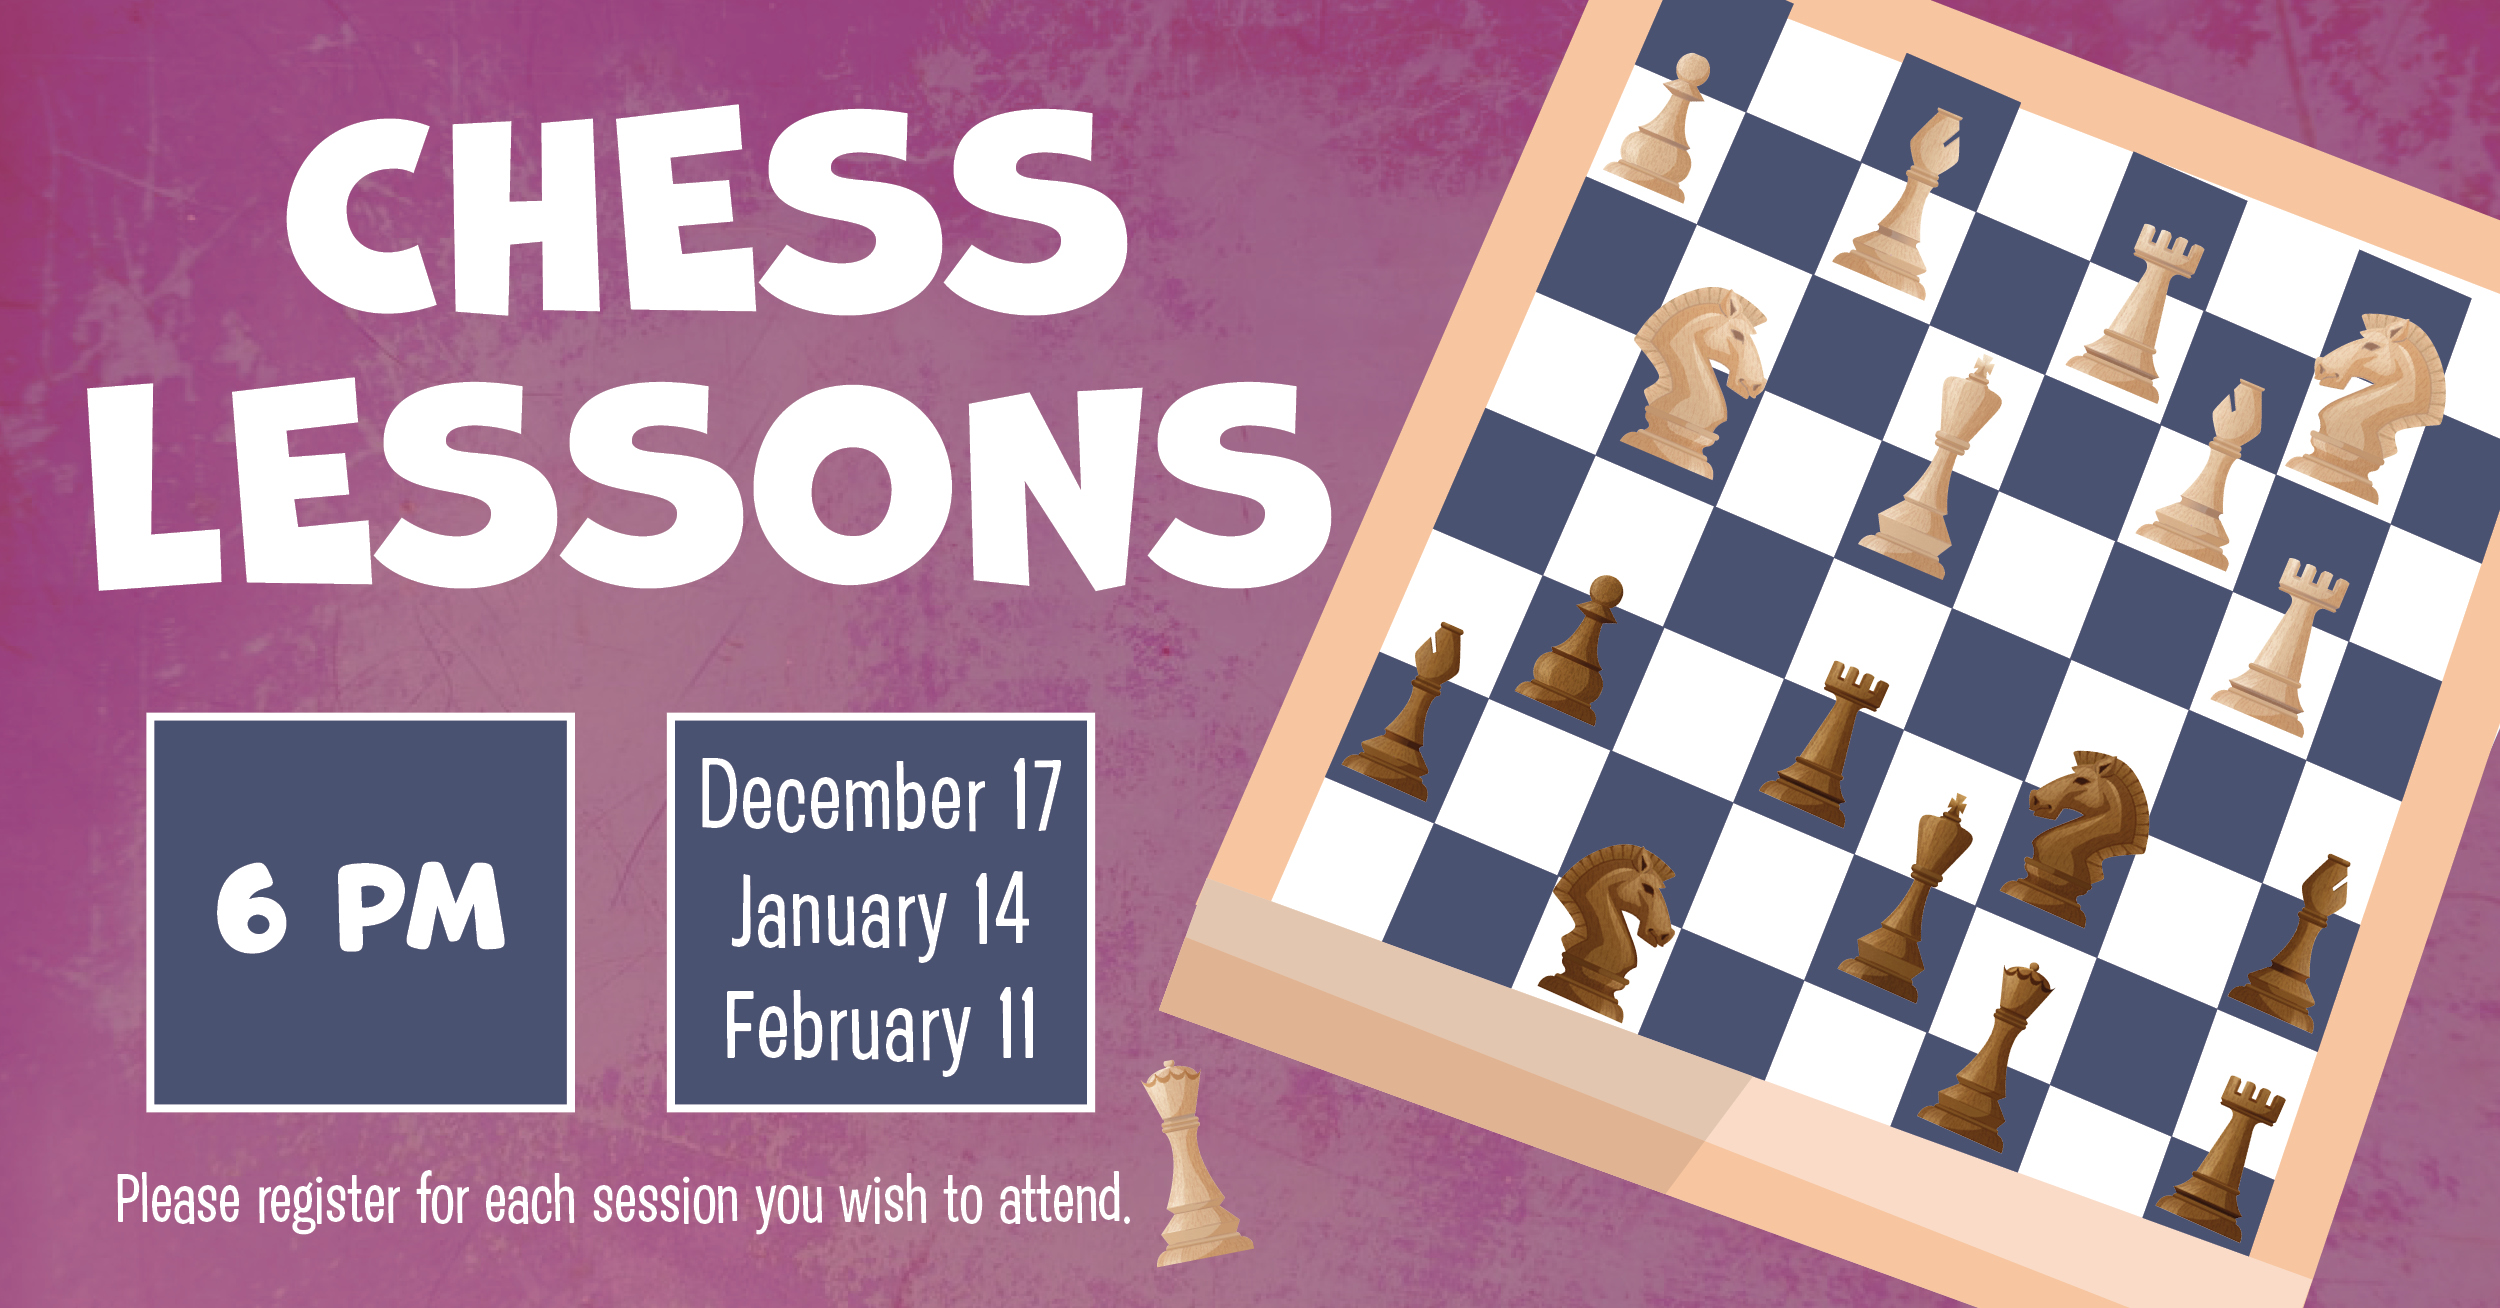 Chess Lessons with Chess Board. ^pm Decemnber 17, January 14, February 11. Please register for each session you wish to attend. 